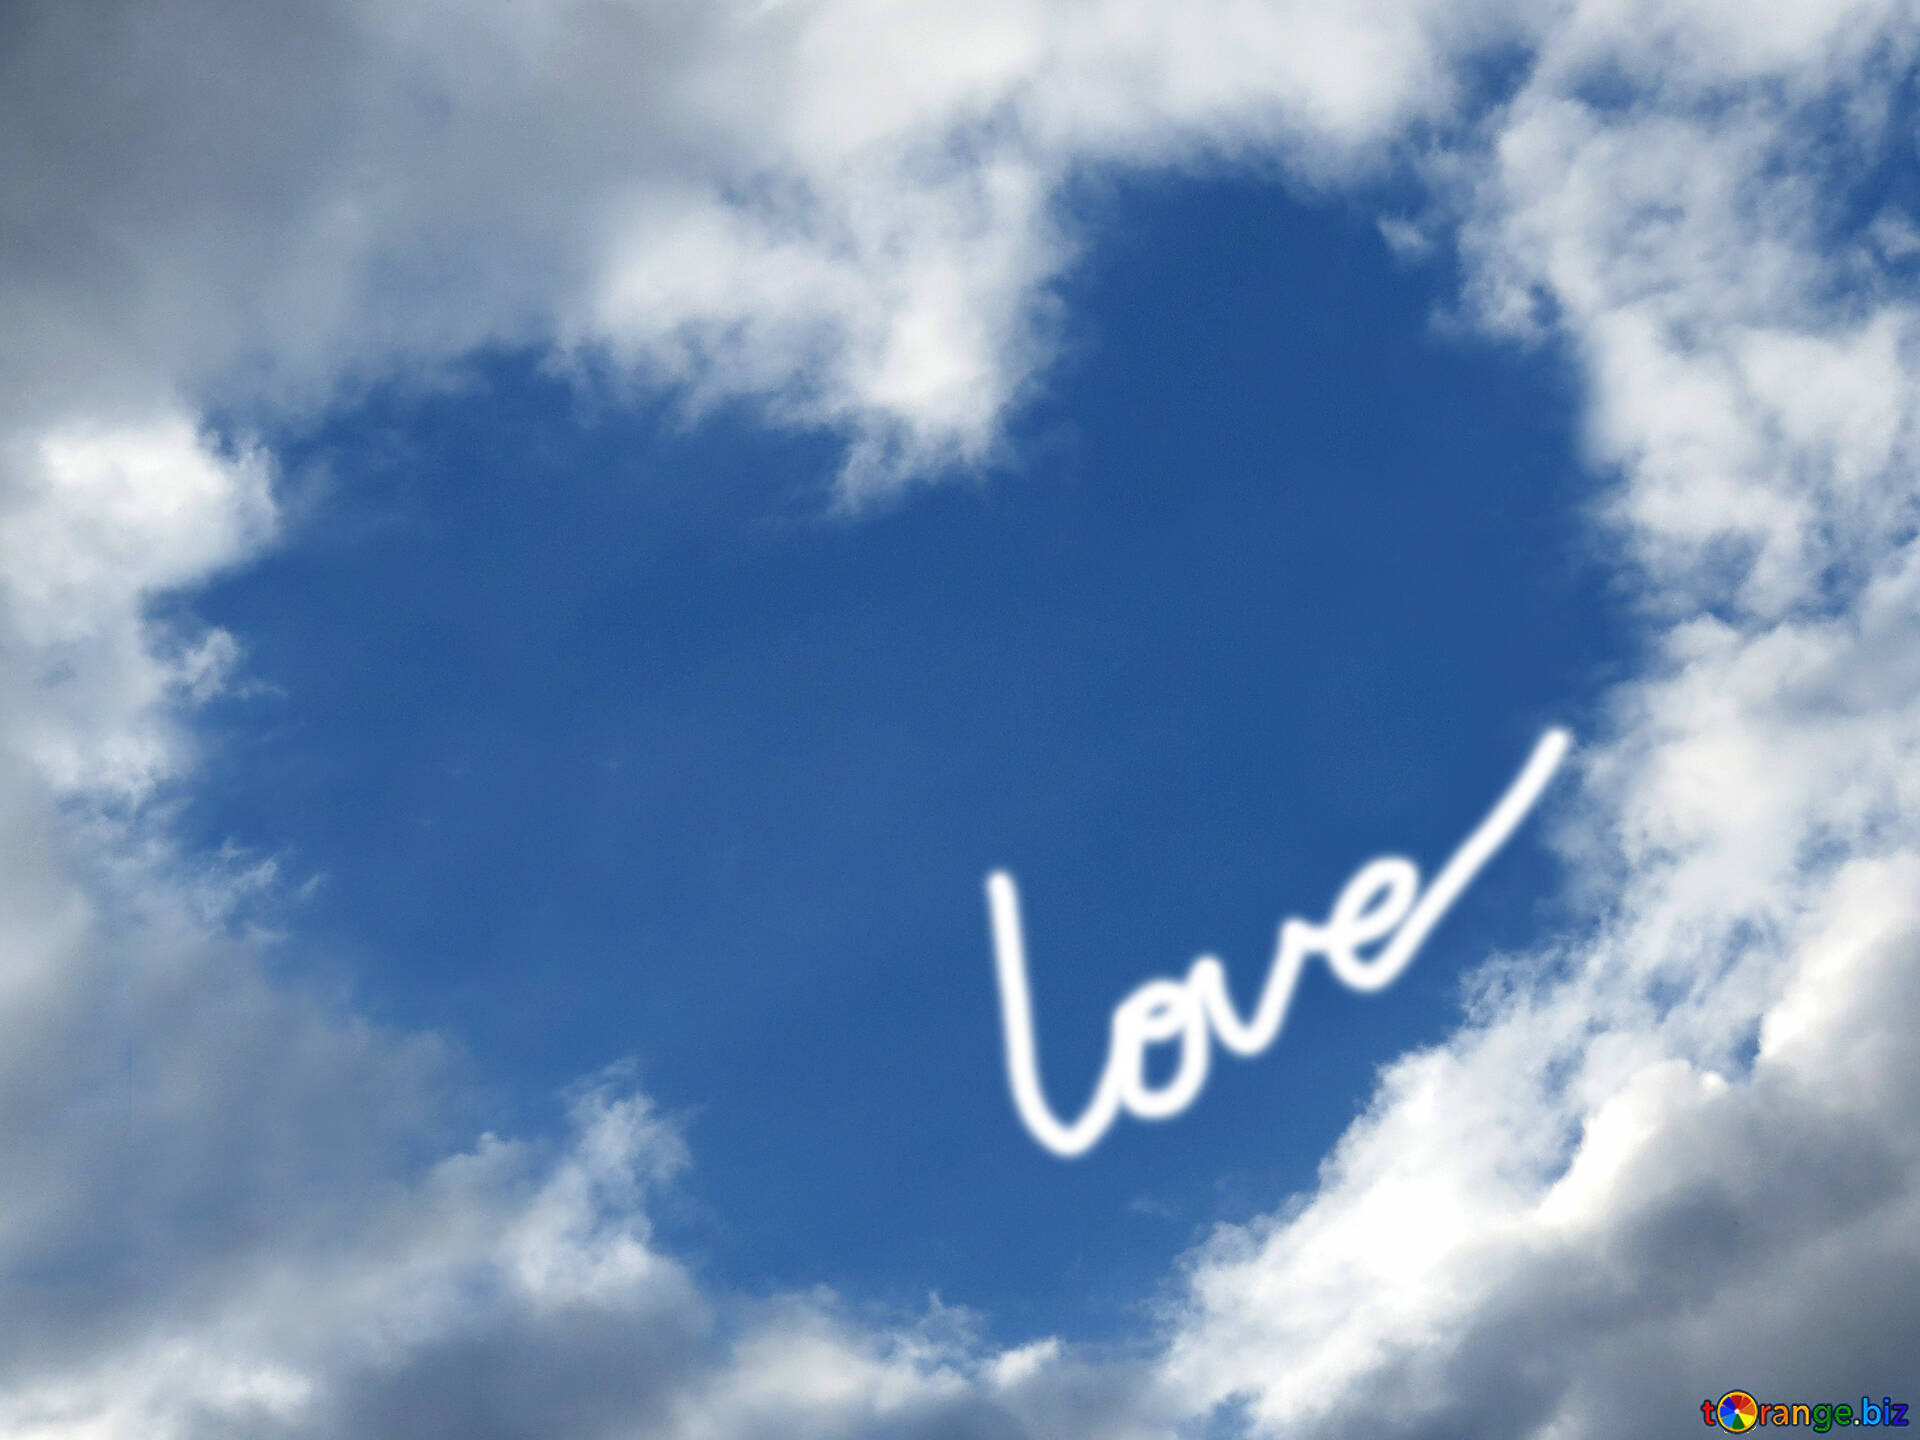 Backgrounds hearts image background love heart sky images heart № 22603 |   ~ free pics on cc-by license